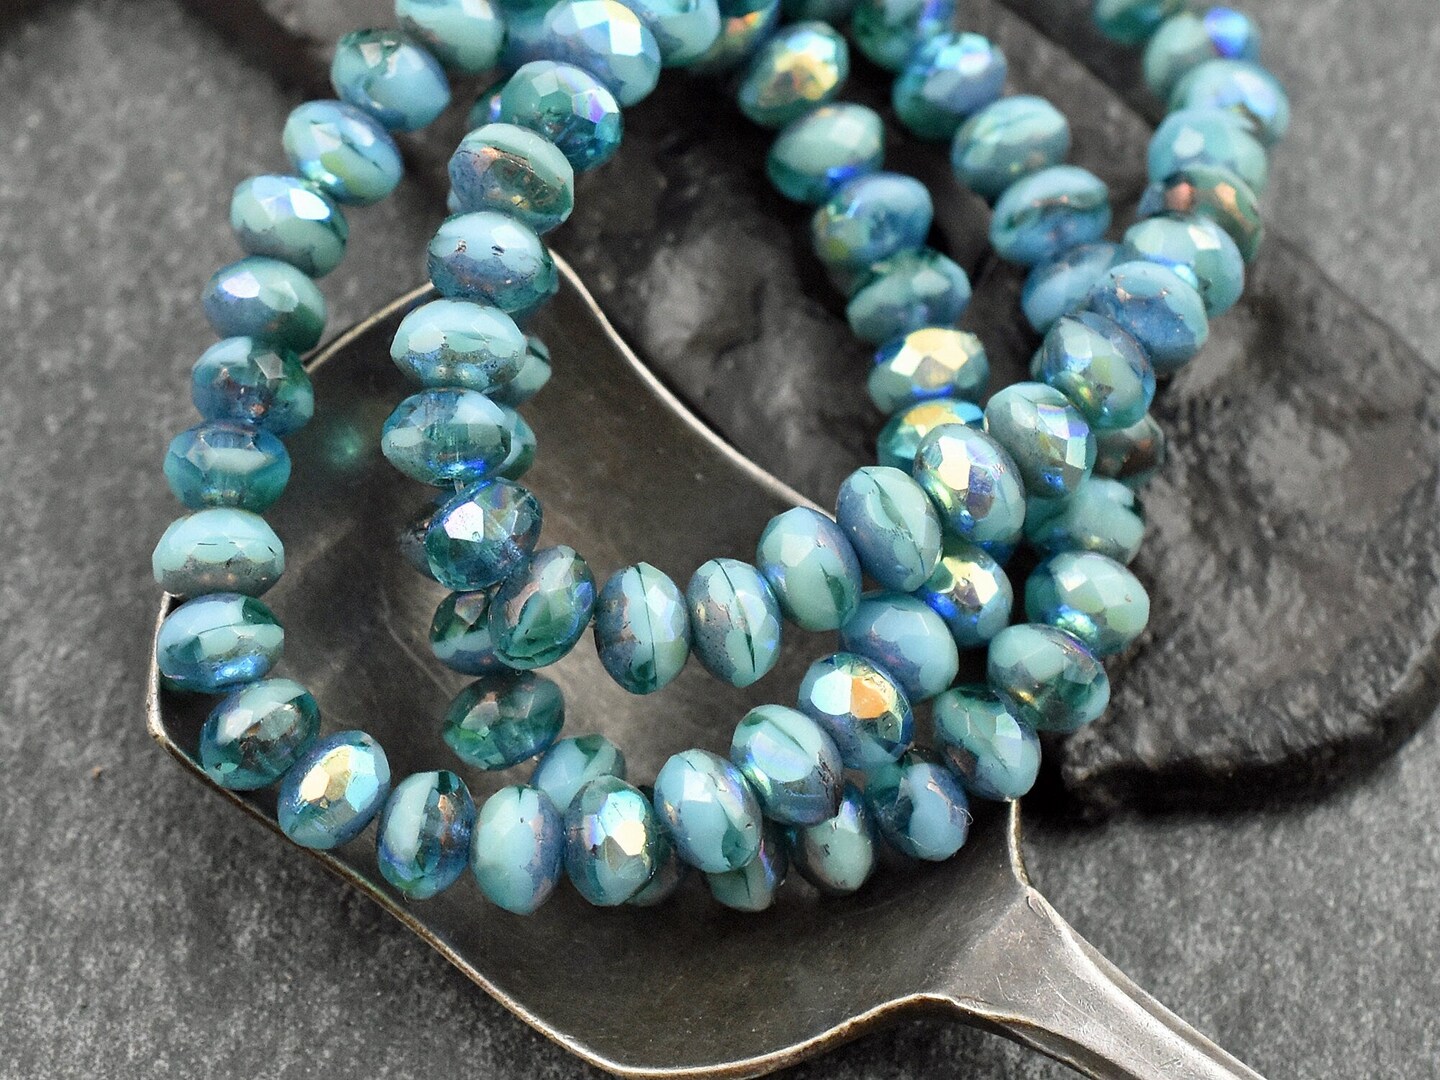 *30* 3x5mm Bronze Washed Blended Pacific Blue Turquoise AB Fire Polished Rondelle Beads